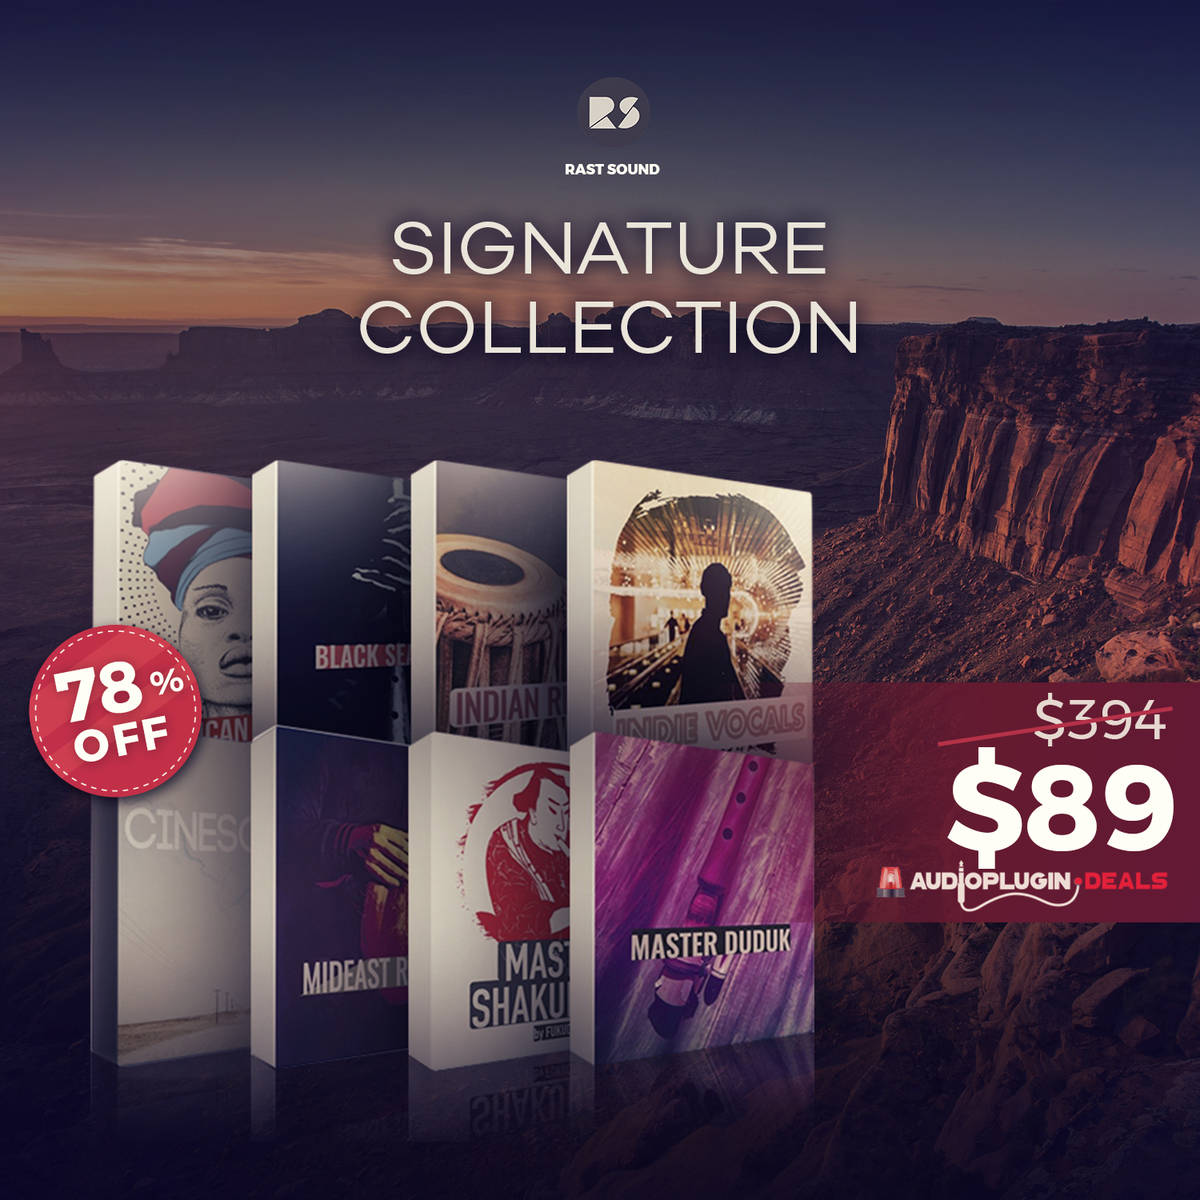 Get (78% OFF) Signature Collection by Rast Sound